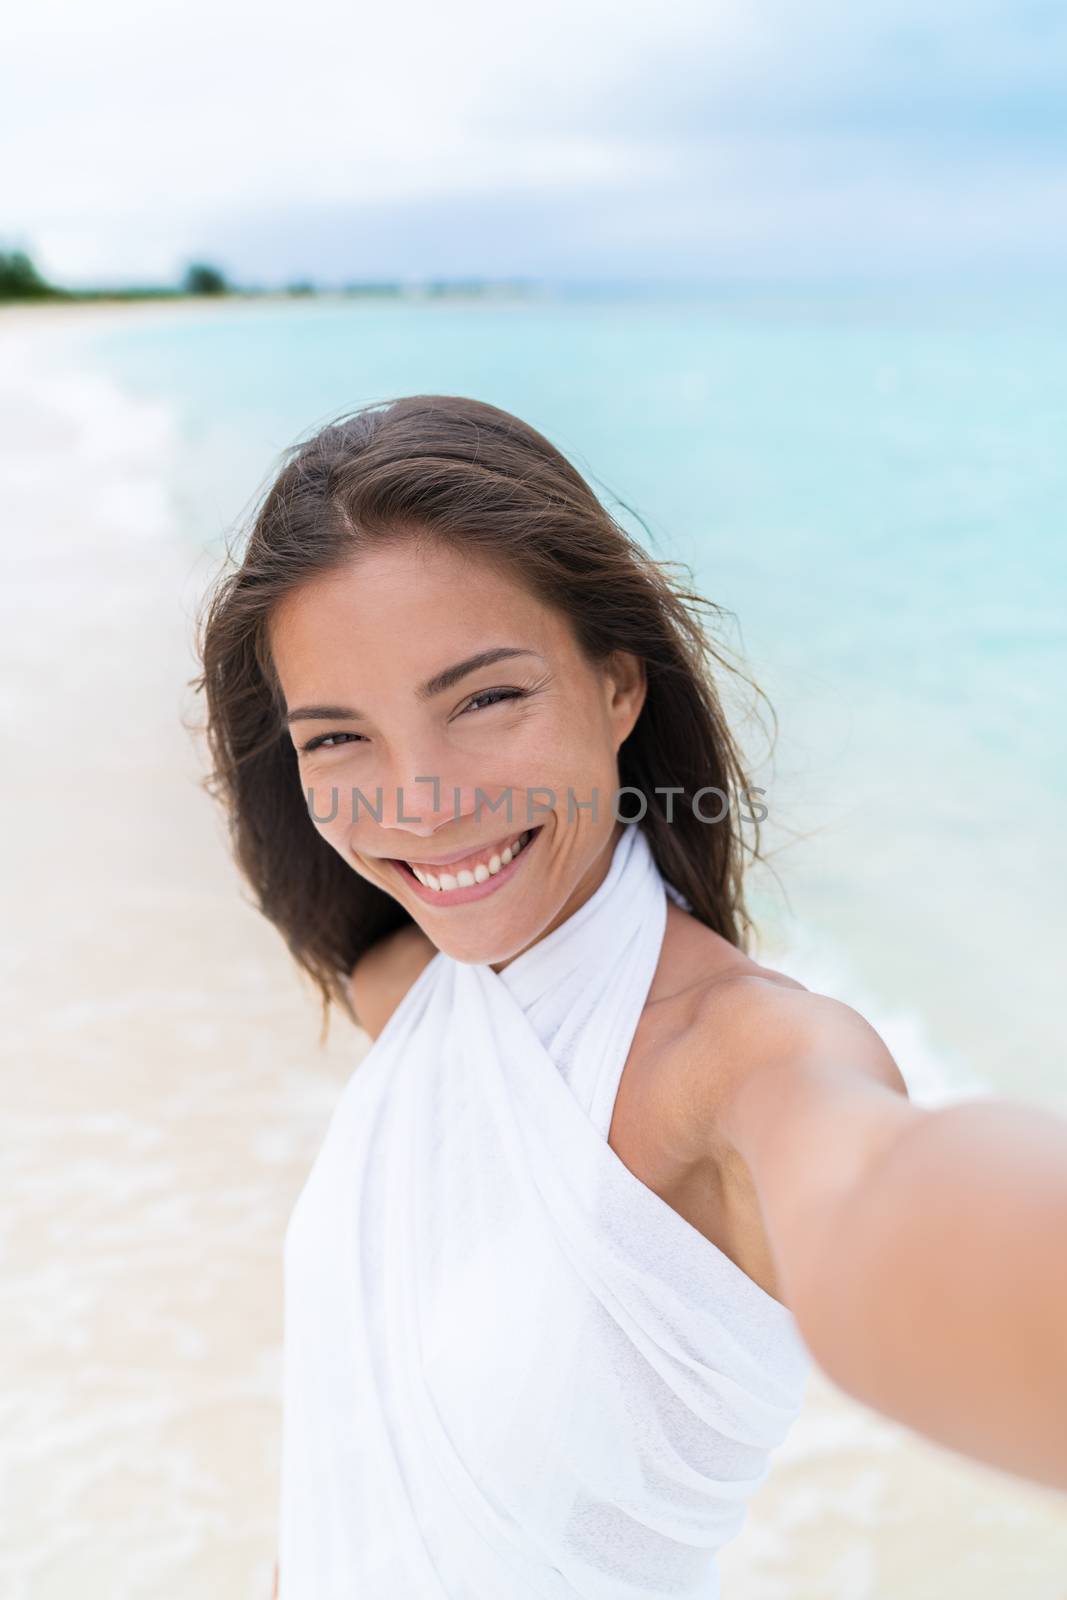 Selfie of beautiful Asian chinese caucasian mixed race woman on beach wearing white cover-up dress. Pretty young adult holding camera phone smiling during summer vacation caribbean travel.